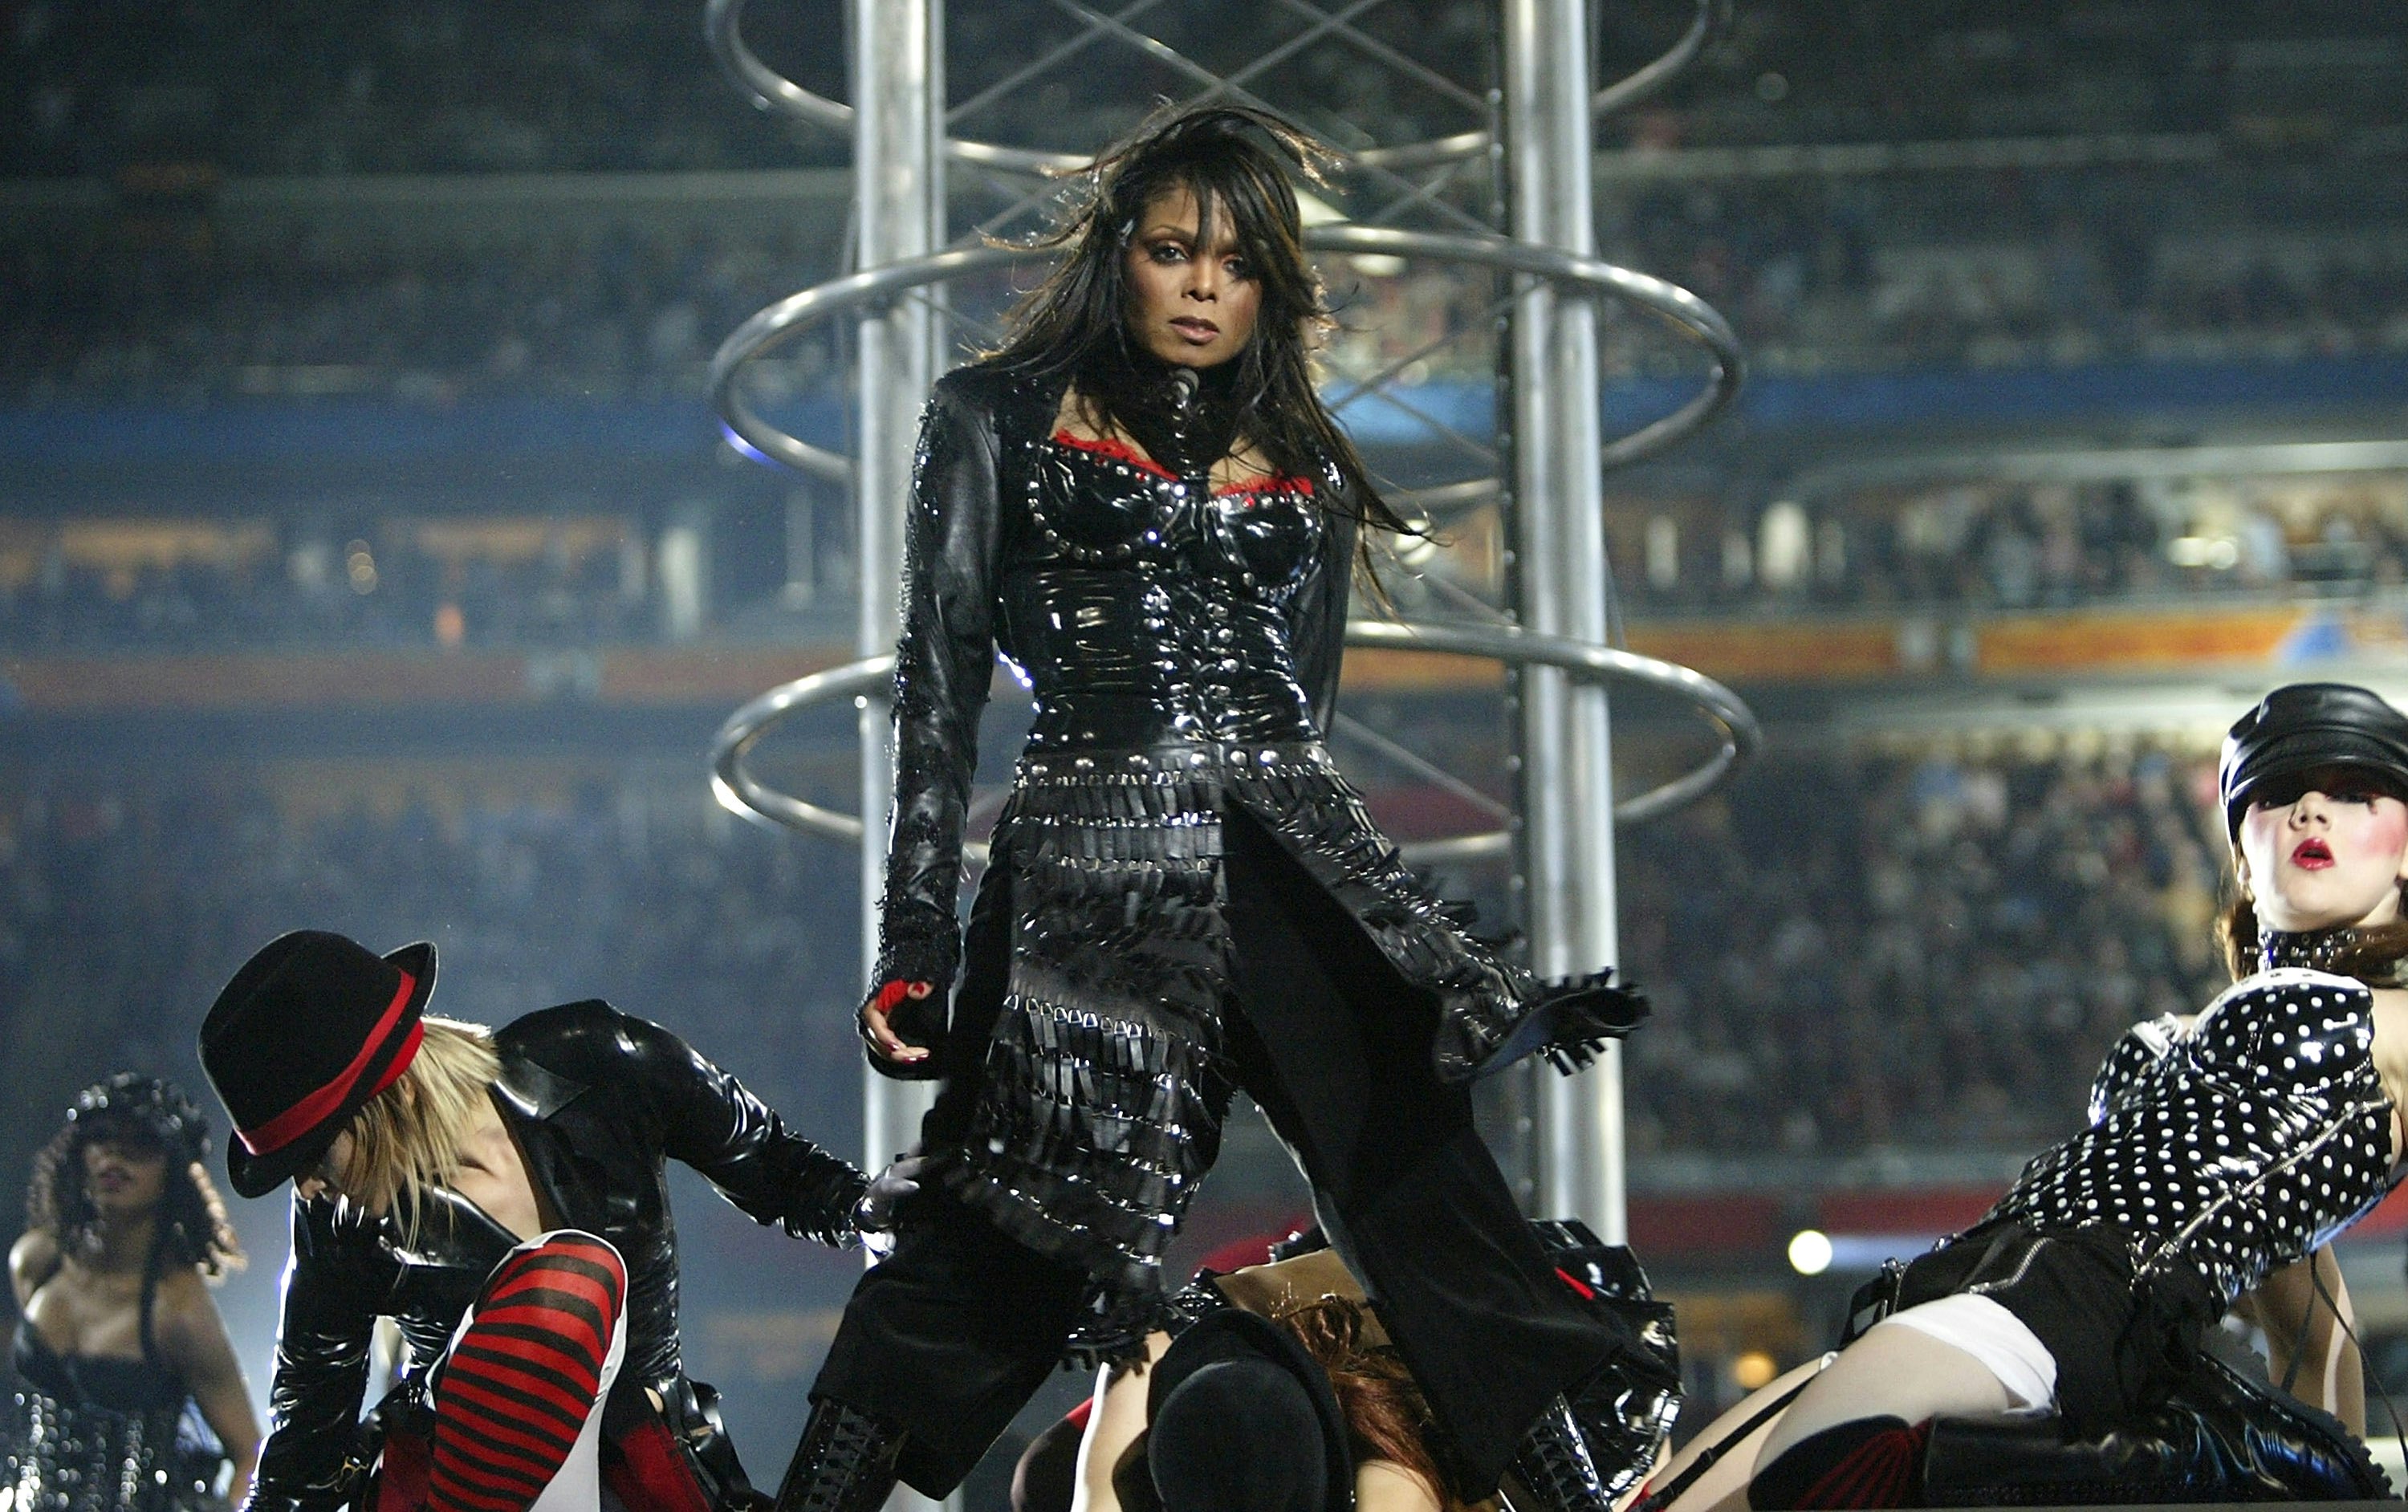 Janet Jackson told Justin Timberlake NOT to say anything after Super Bowl nip  slip as she claims it was an 'accident